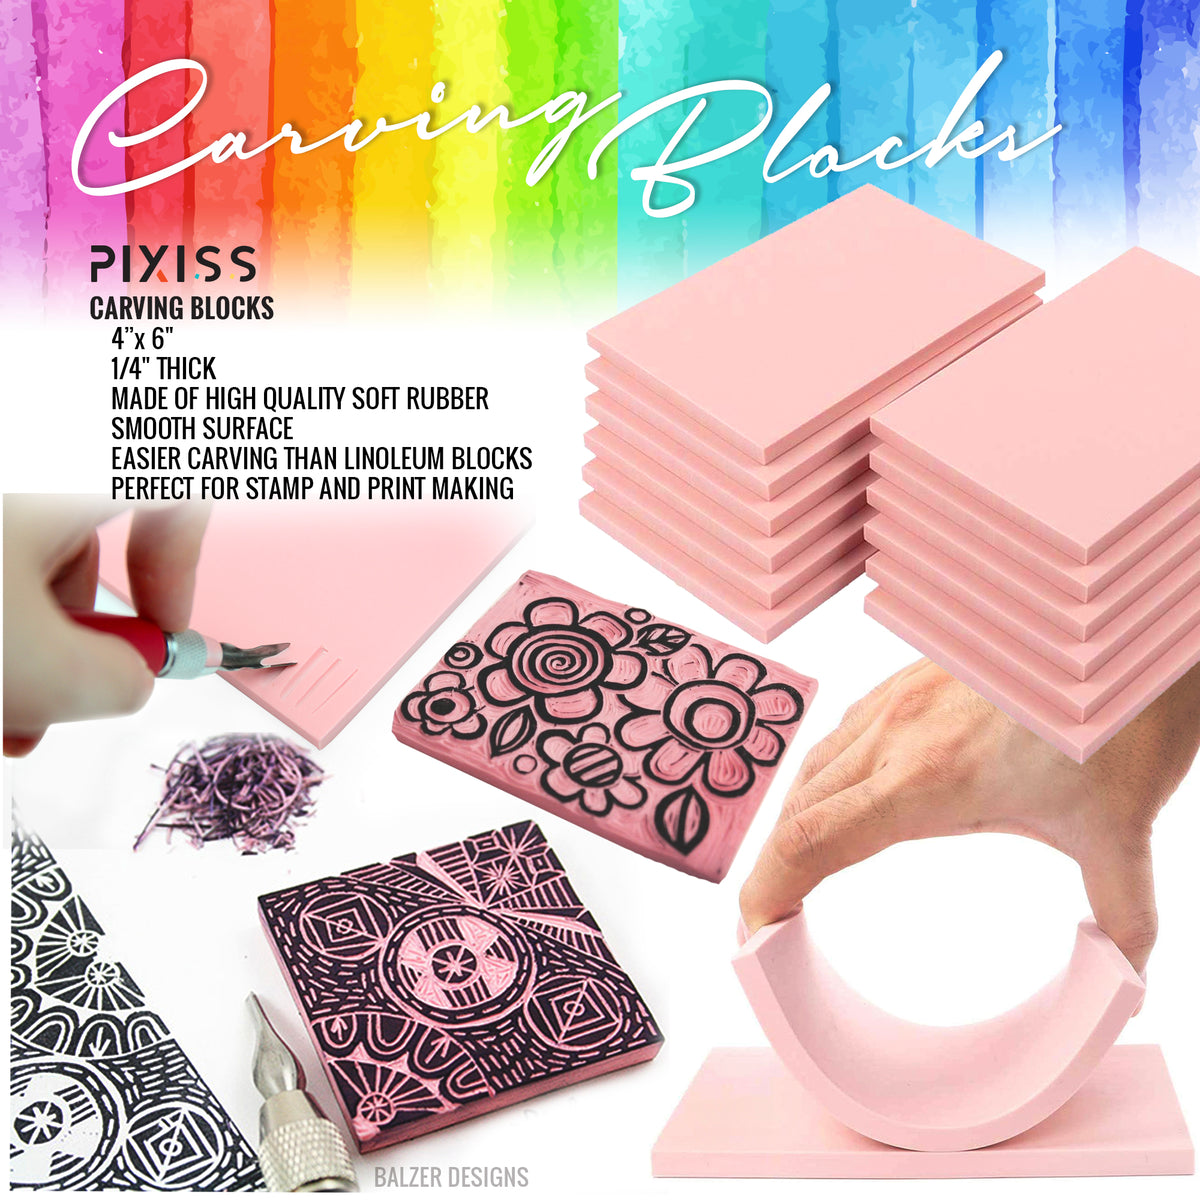 WerkWeit 12pcs Rubber Carving Blocks Linoleum Block with Cutter Tools Stamp Making Kit Linoleum Cutter with 6 Types Blades and 12-Pack Carving Rubber